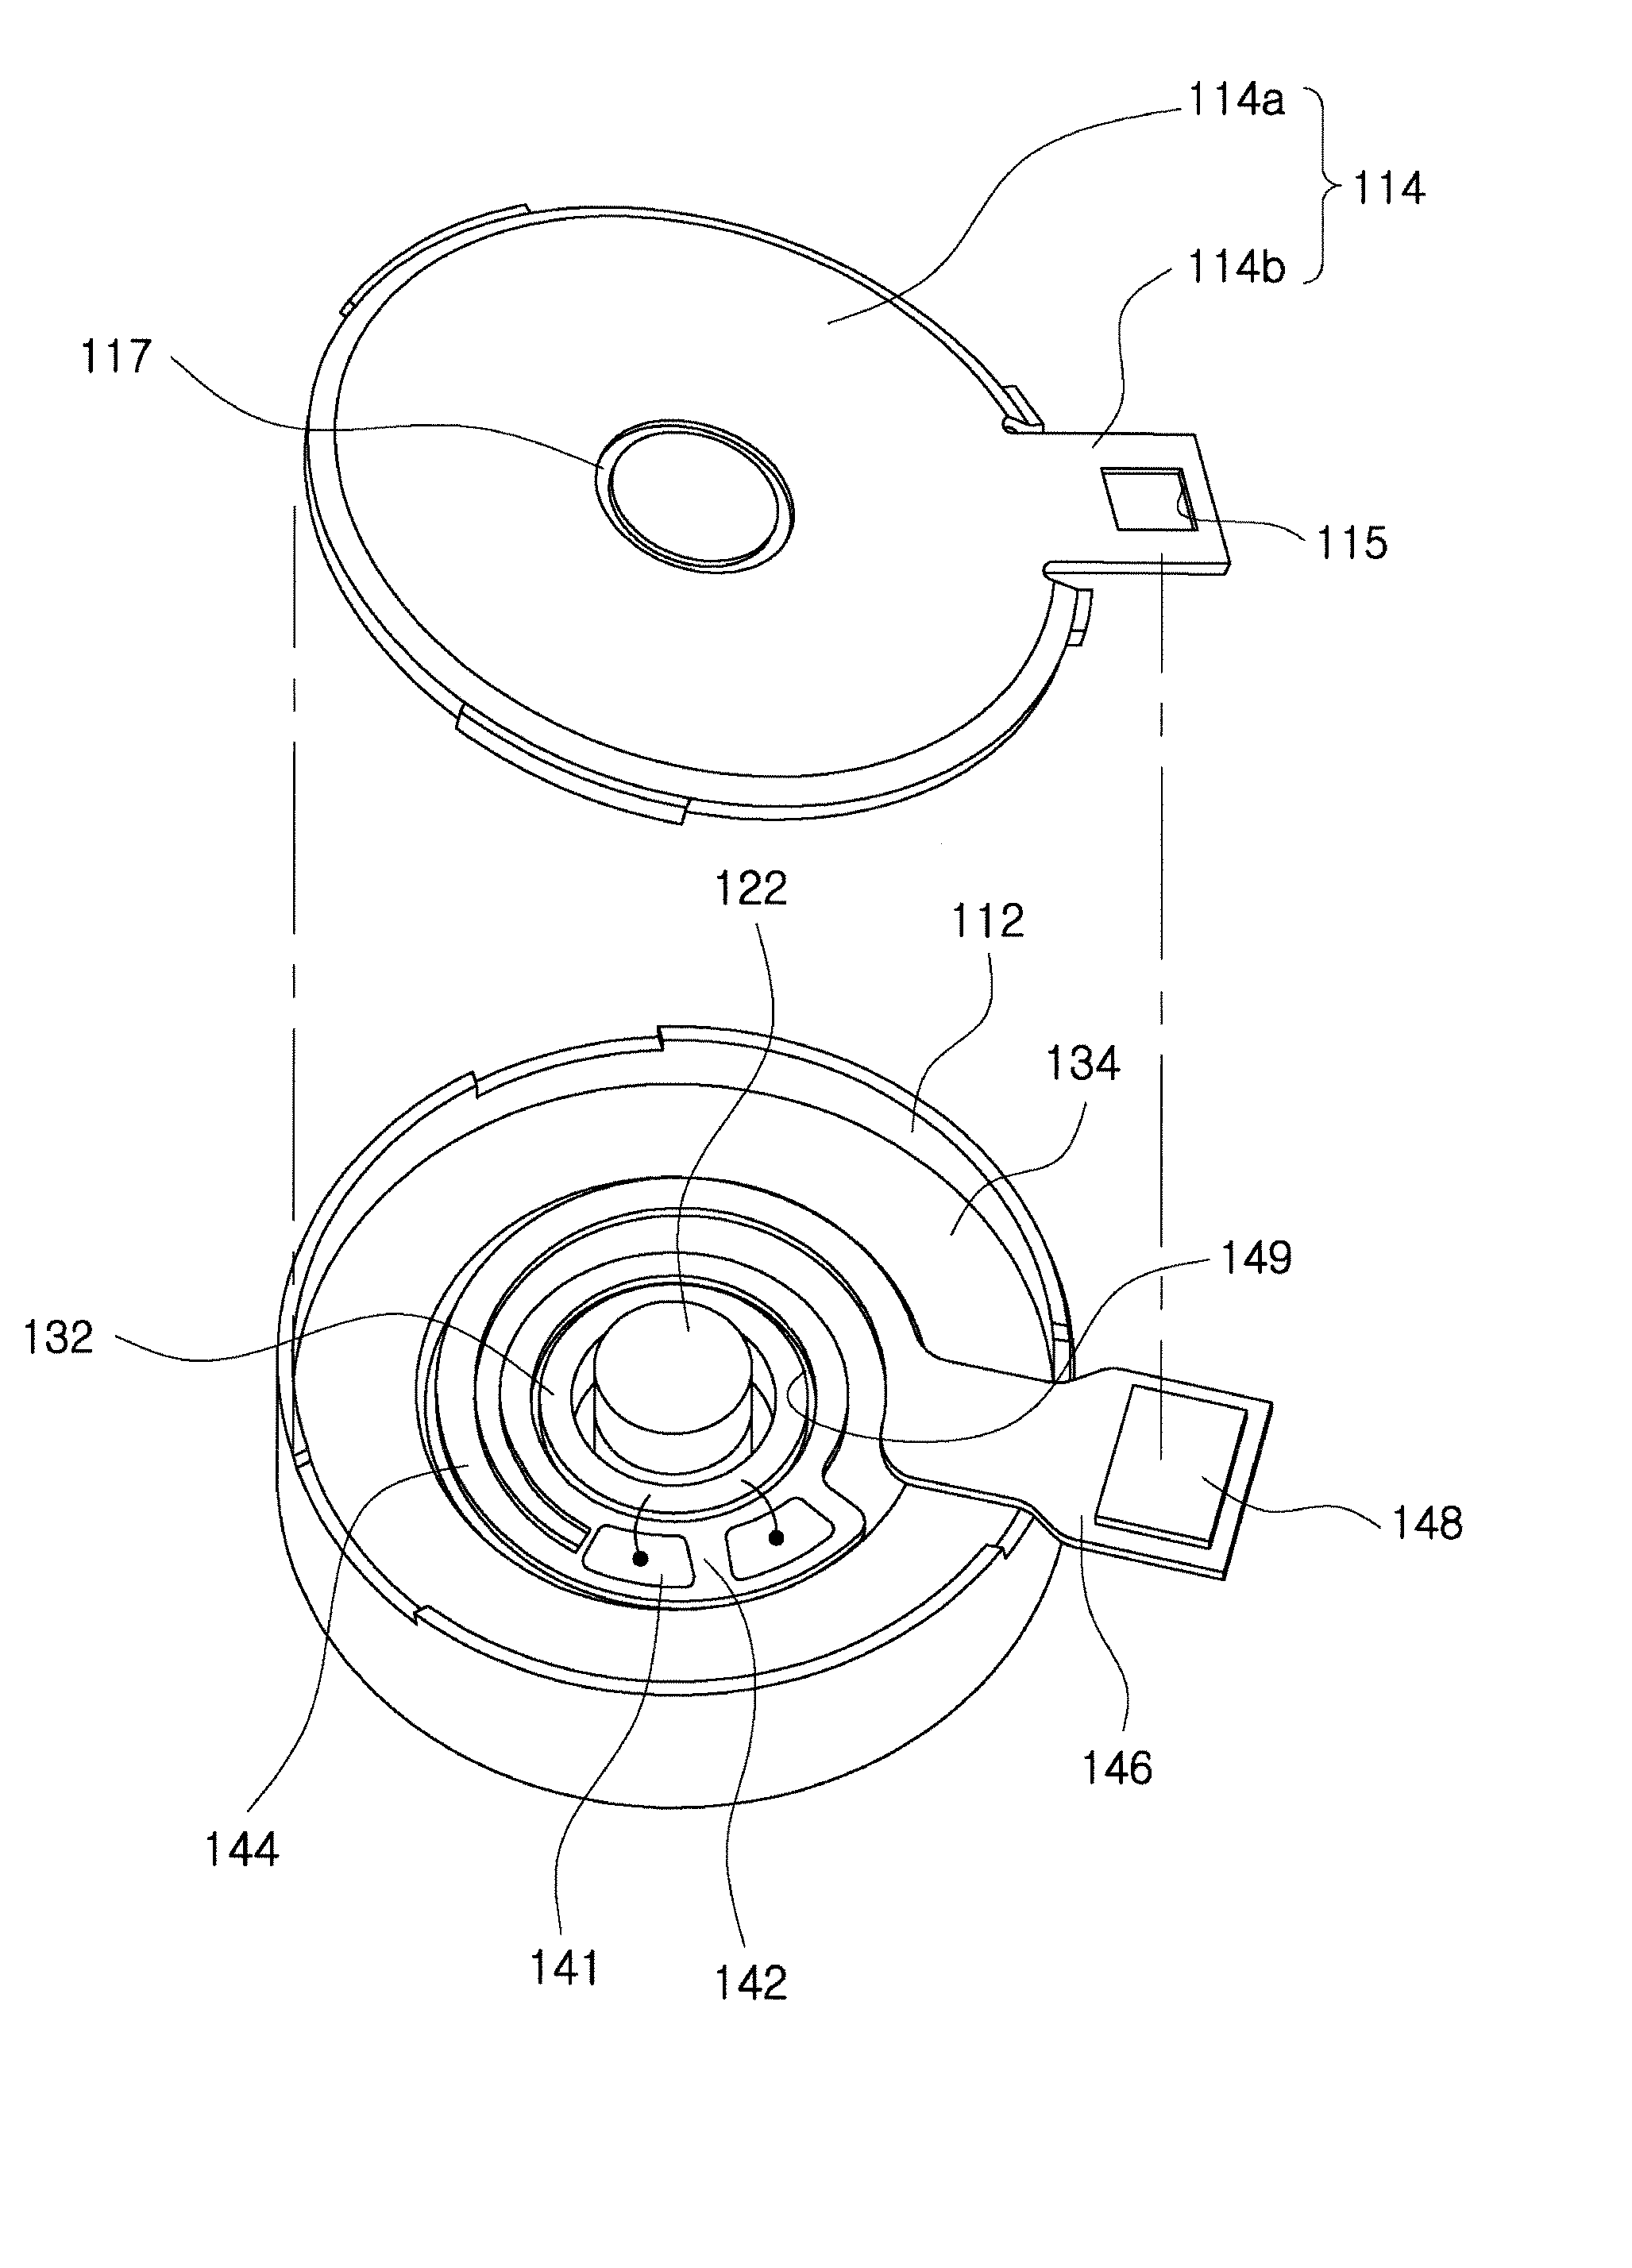 Linear vibrator having exposure hole or groove in the cover